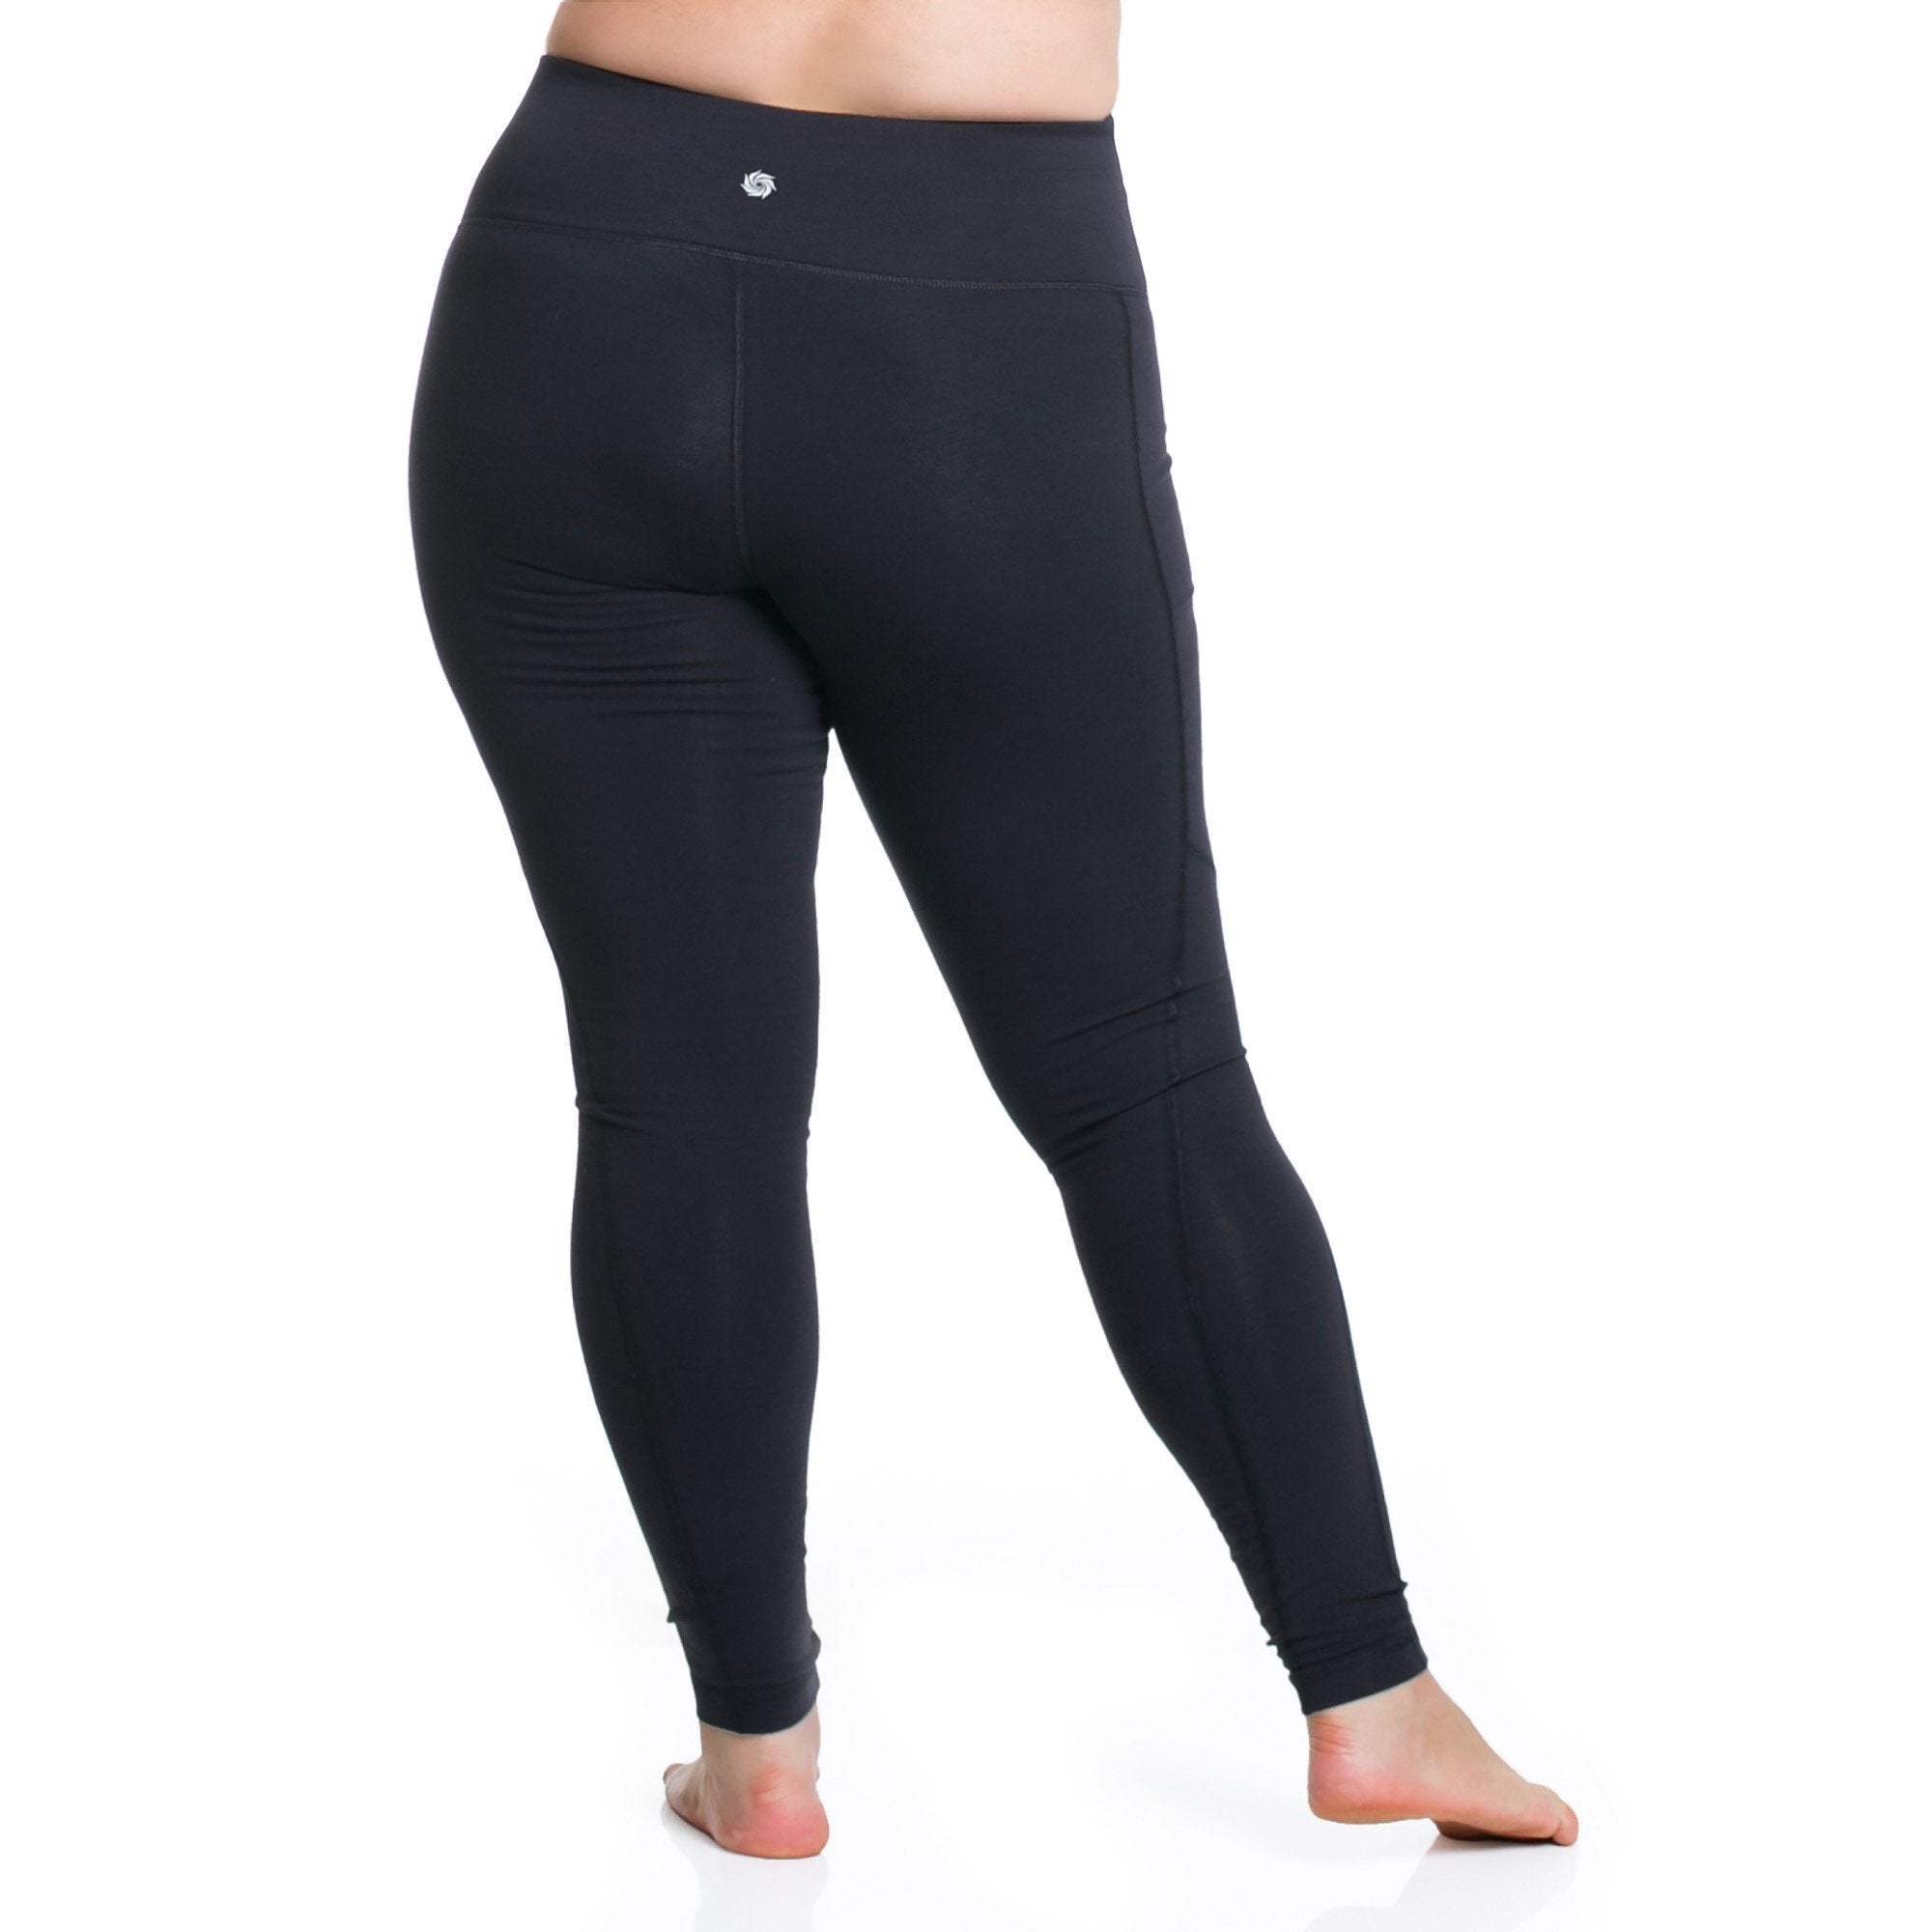 15 Minute Curvy Workout Pants for Gym